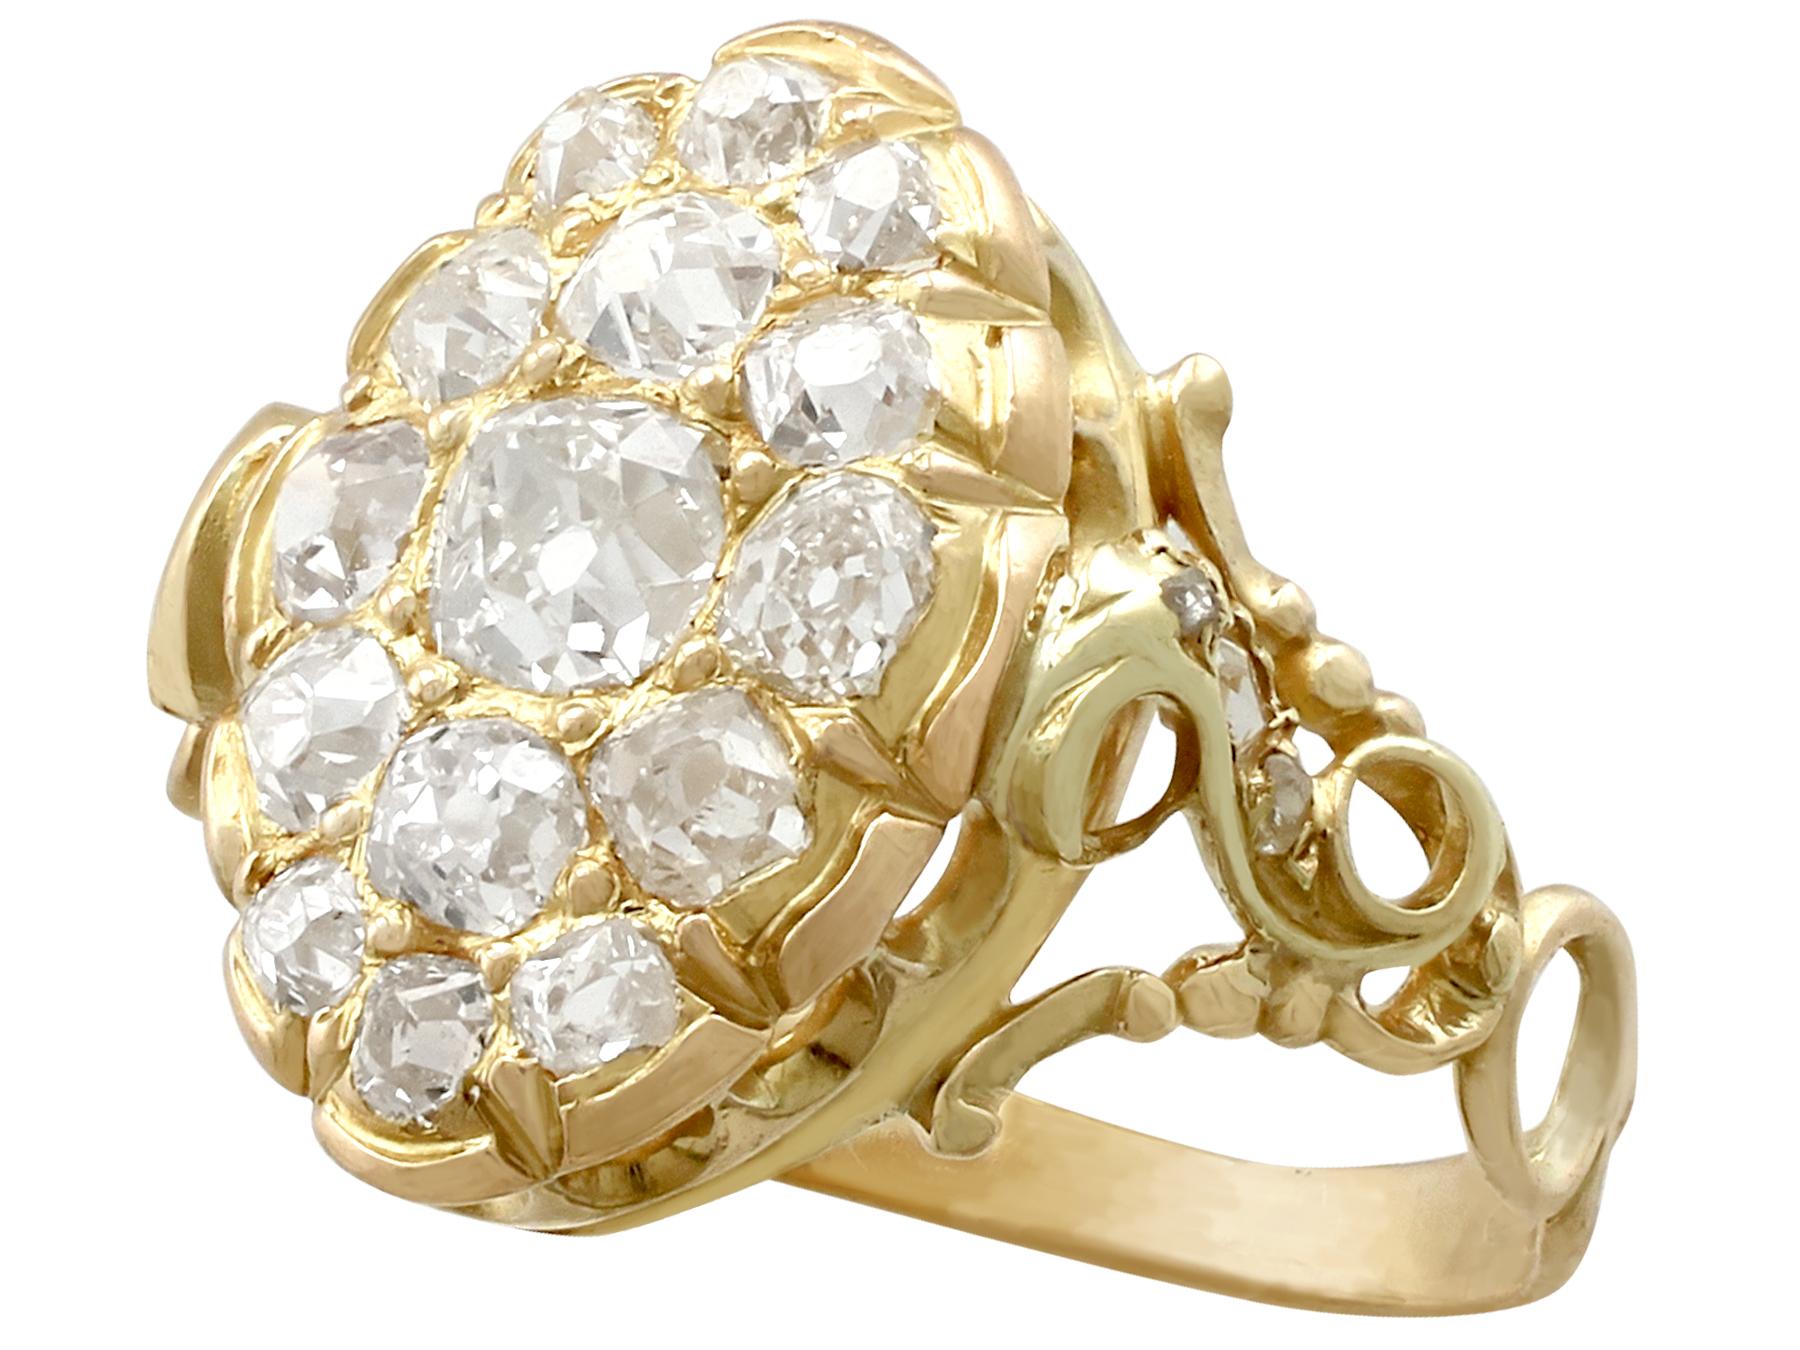 Women's or Men's 1870s Antique Victorian 1.51 Carat Diamond and Yellow Gold Cocktail Ring